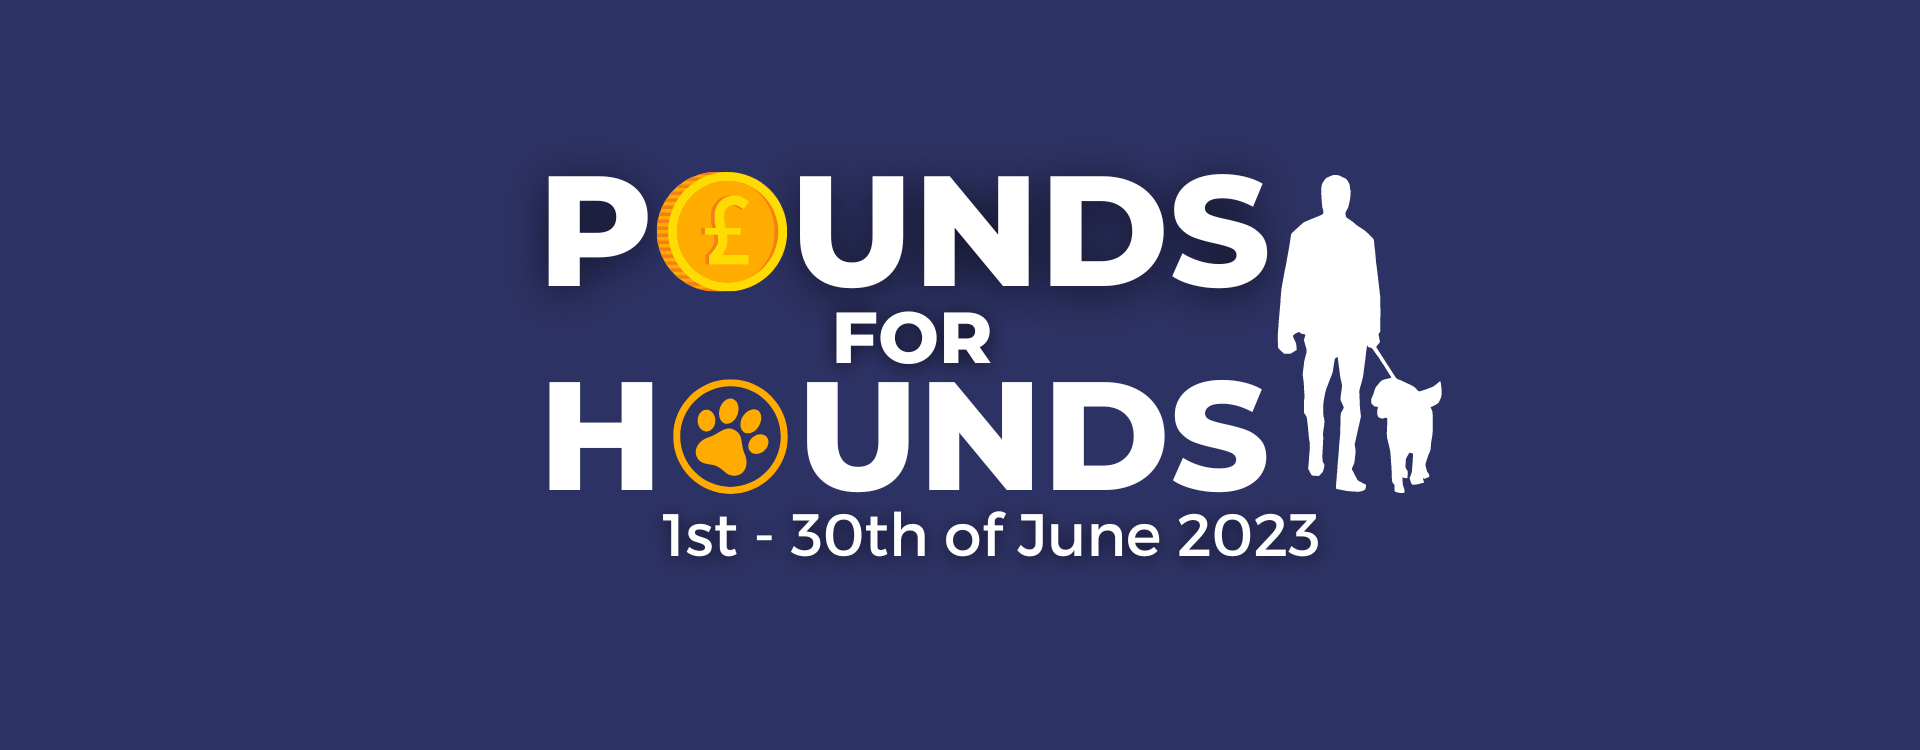 Pounds for Hounds logo 